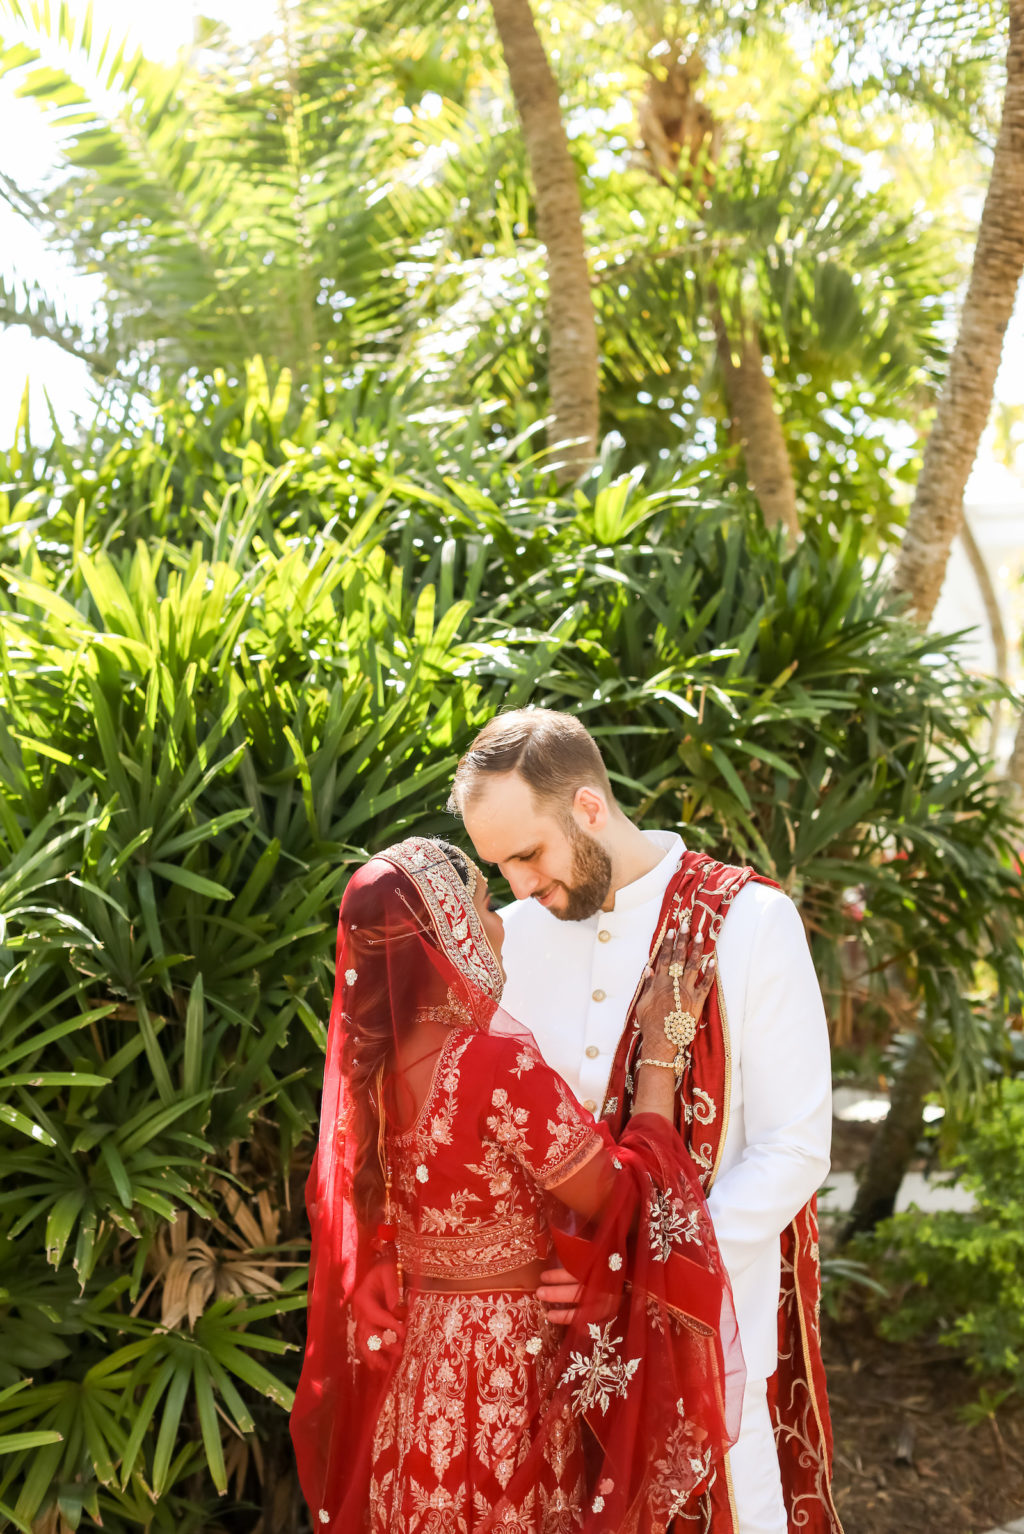 Indian Hindu Bride Wearing Red and Gold Lengha Two Piece Dress and Veil, Groom Wearing White Bandhgala Suit with Red and Gold Dupatta | Tampa Bay Wedding Photographer Lifelong Photography Studios